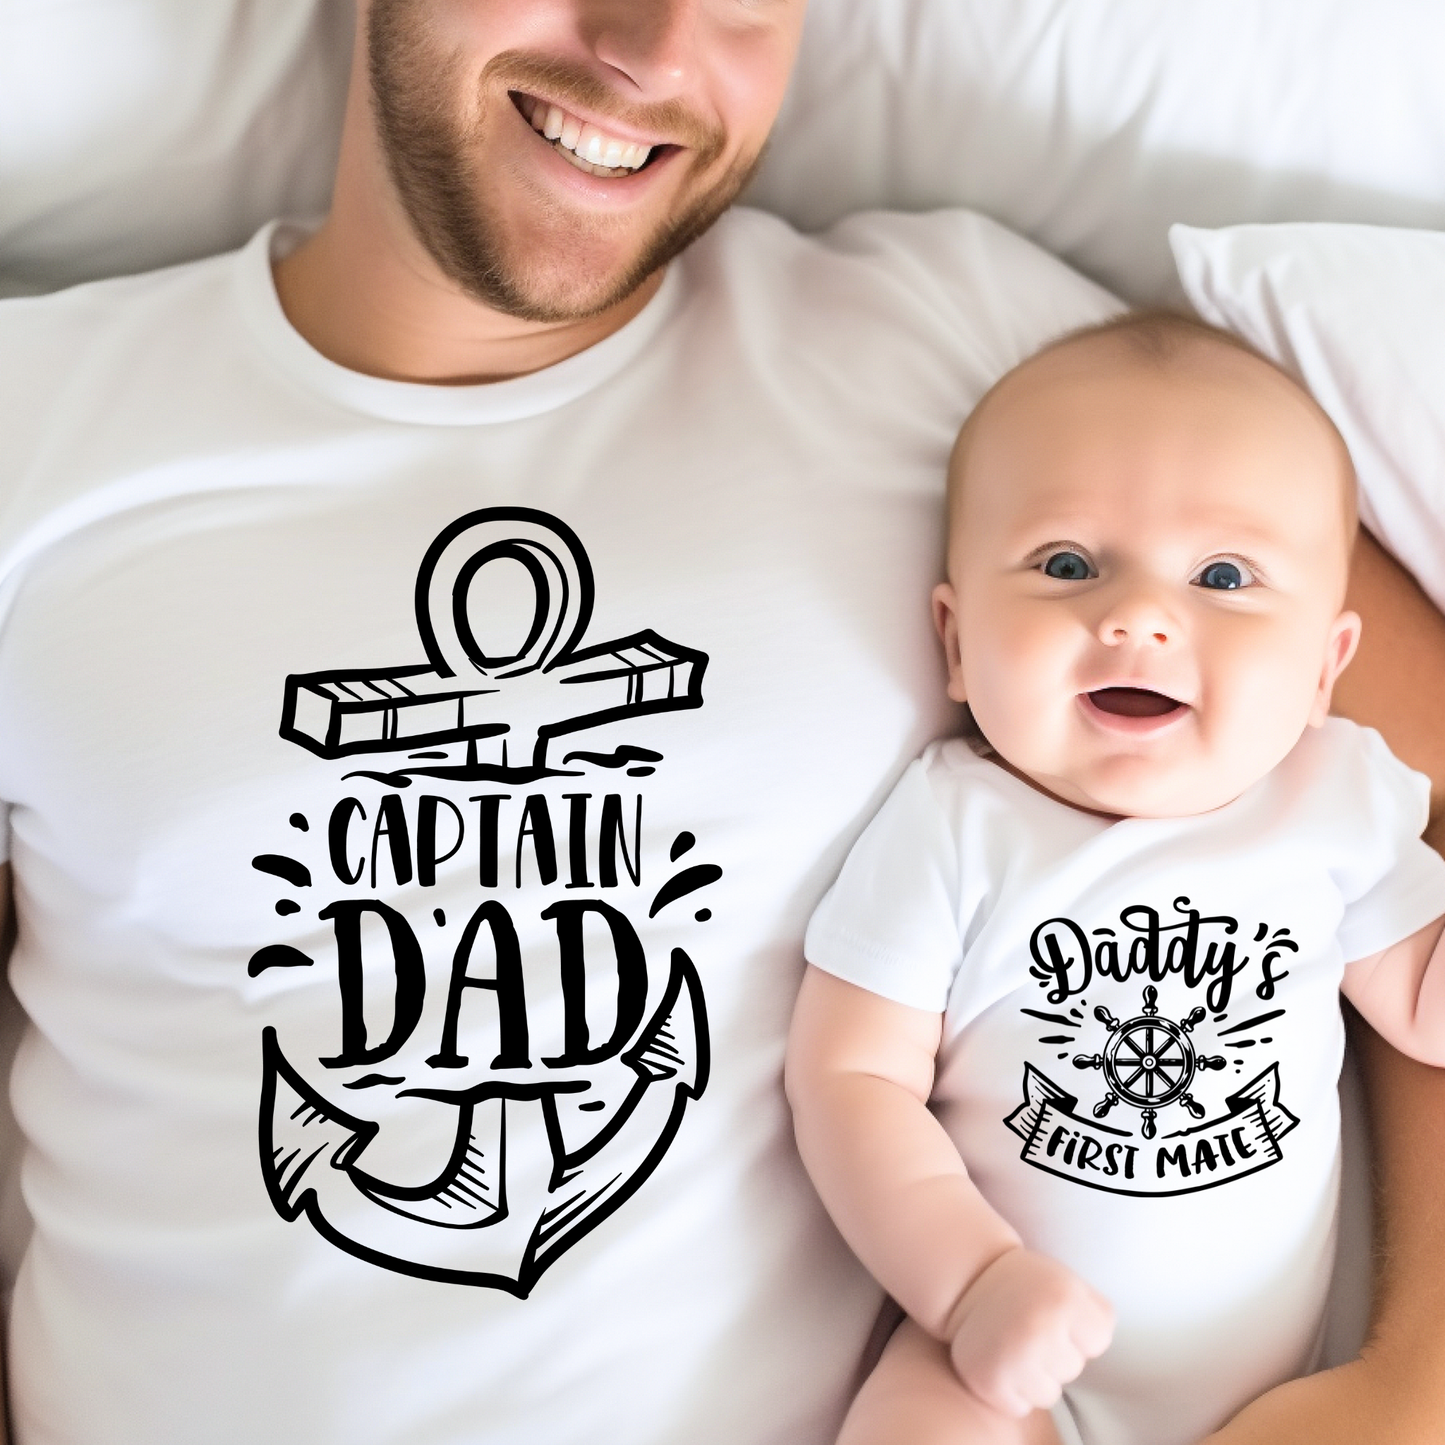 Ready to Set Sail! (Captain & First Mate) - Daddy and Baby Matching Outfits